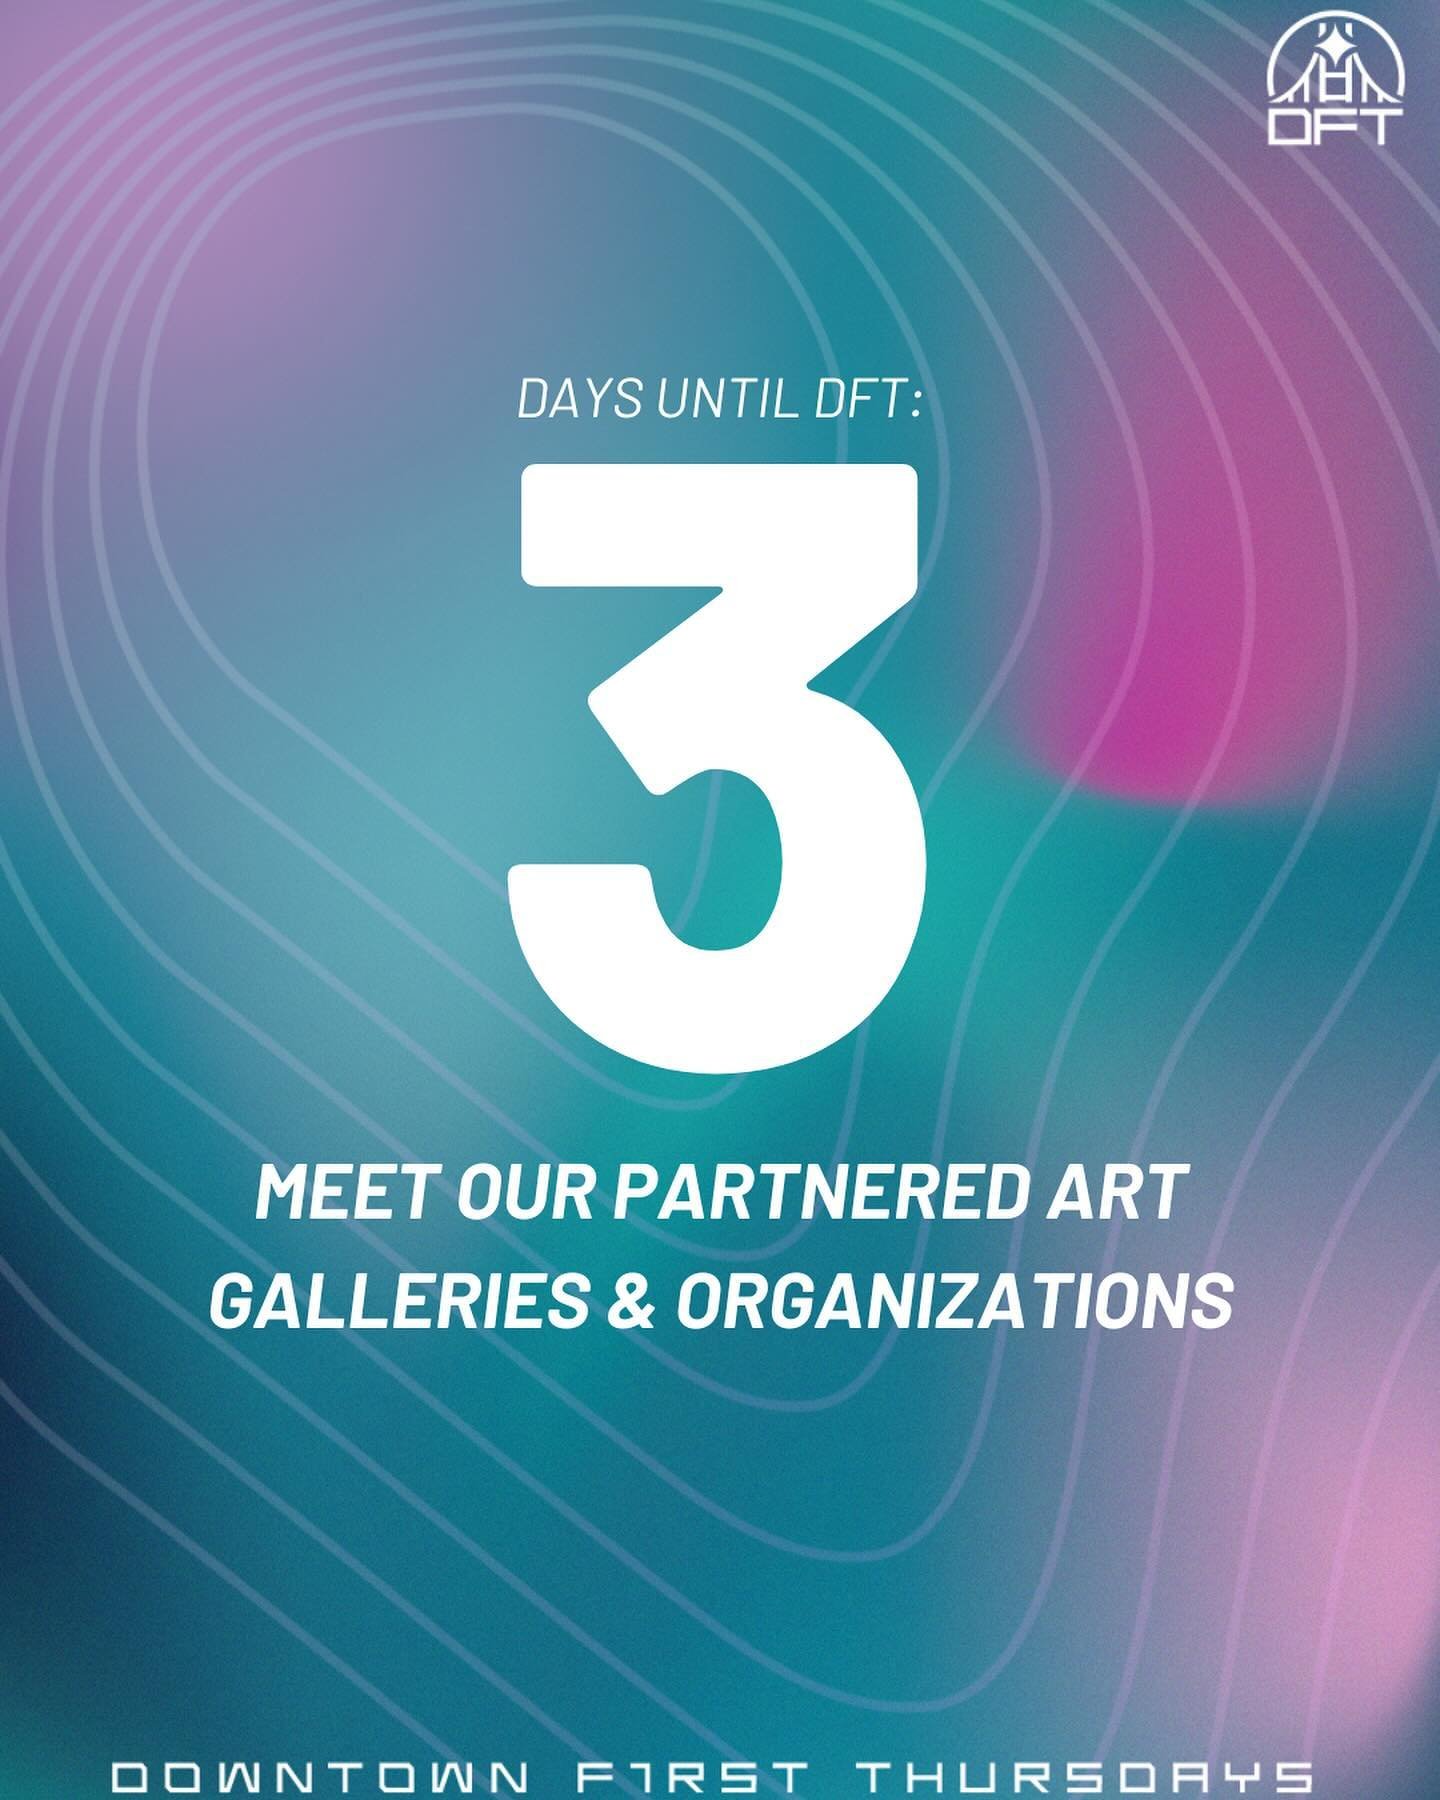 🖼️ INTRODUCING DFT&rsquo;S PARTNERED ART GALLERIES &amp; ORGANIZATIONS!

🧑🏼&zwj;🎨DFT is not just taking the arts to the streets&mdash; we&rsquo;re taking the streets to the arts! Each of our partnered galleries have something extra special prepar